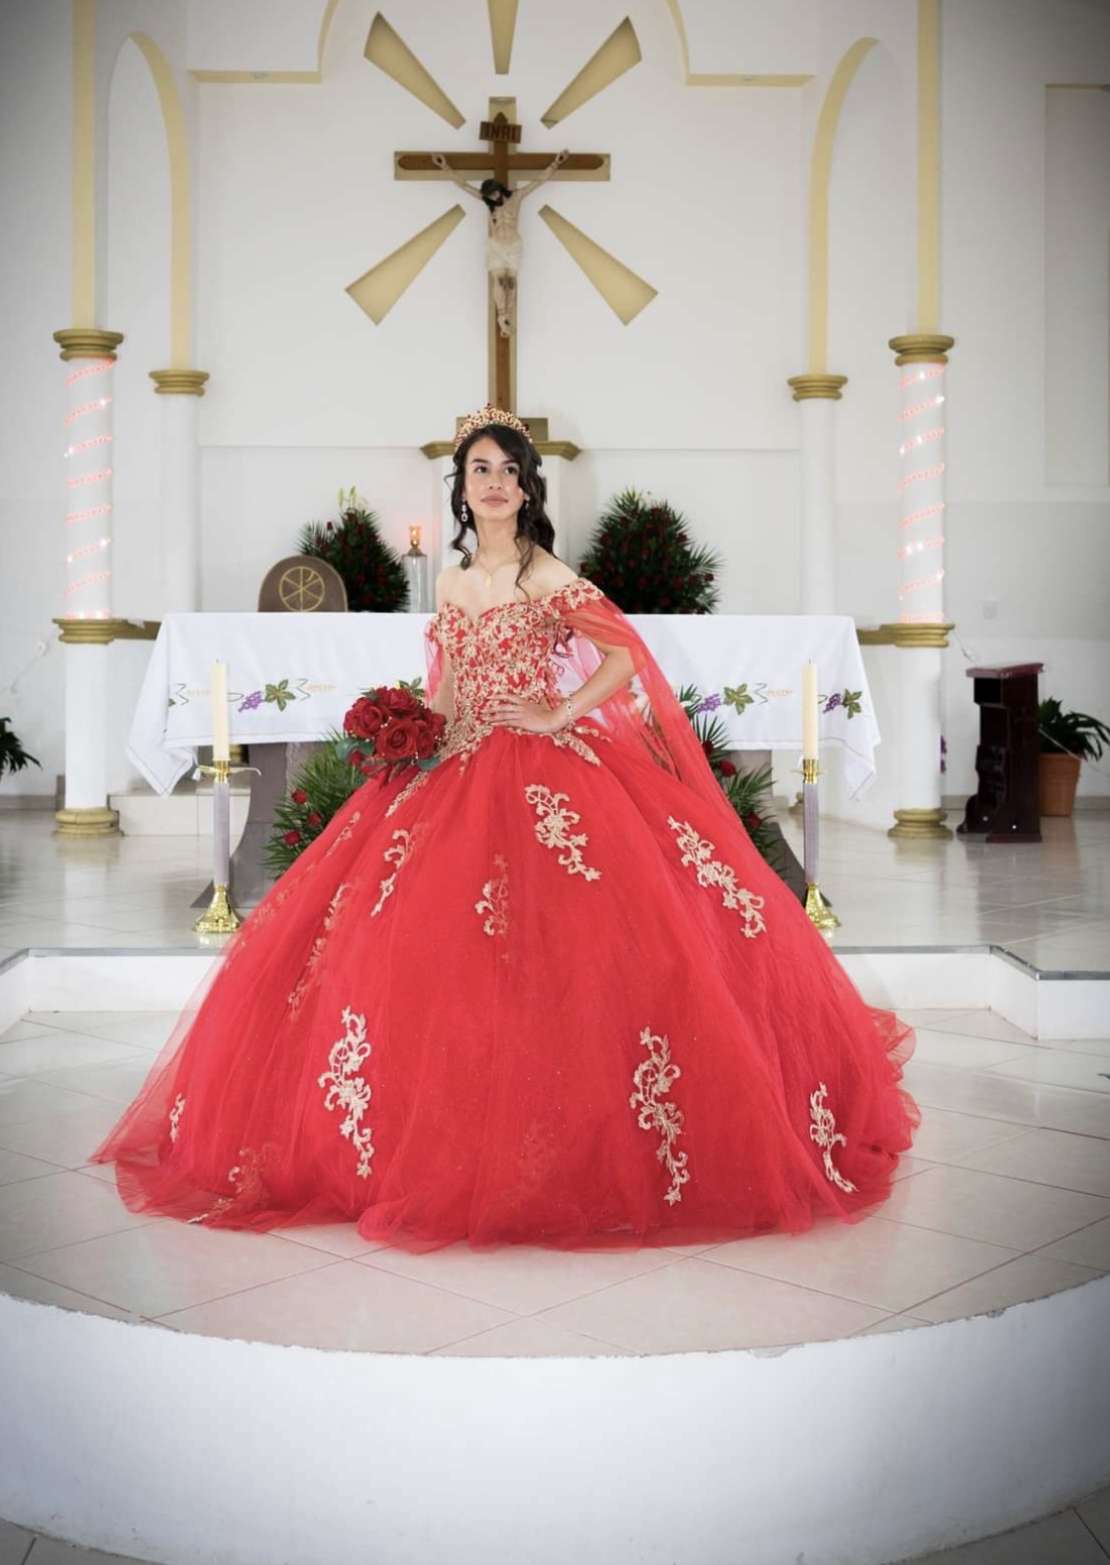 Showing off her dress, sophomore Ryann Petraszewsky poses at her quinceañera.